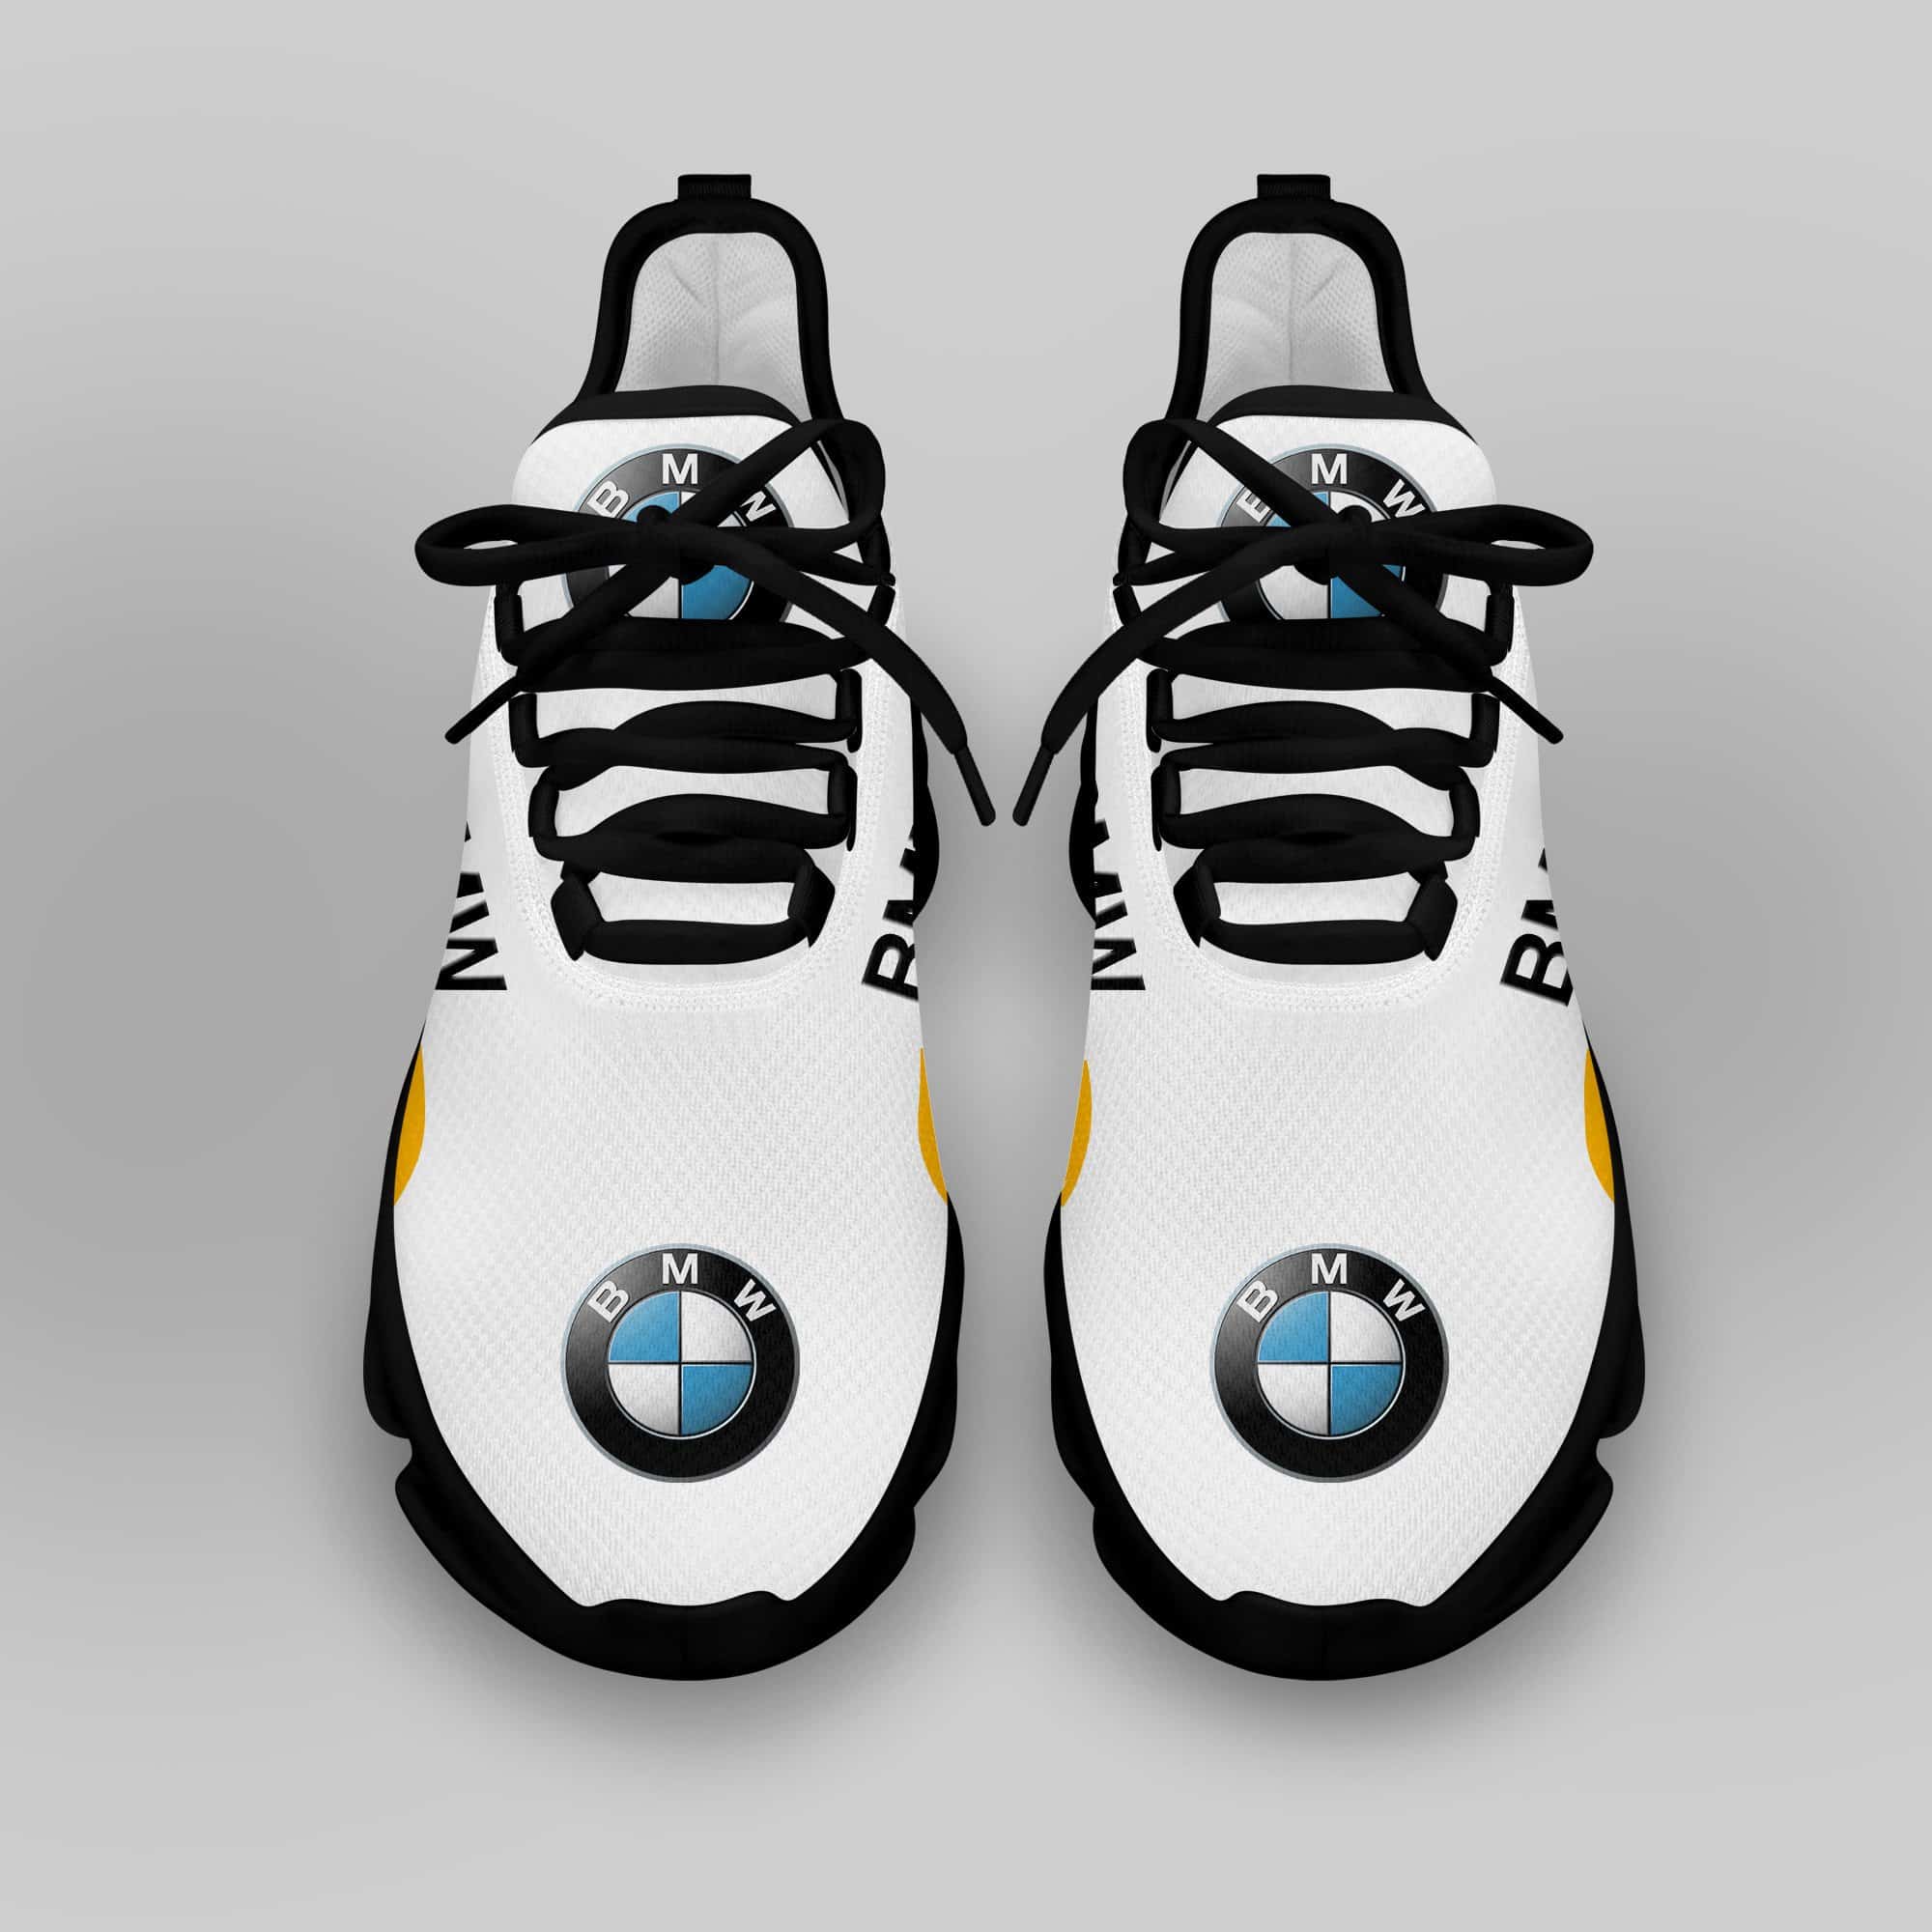 Bmw Running Shoes Max Soul Shoes Sneakers Ver 56 3